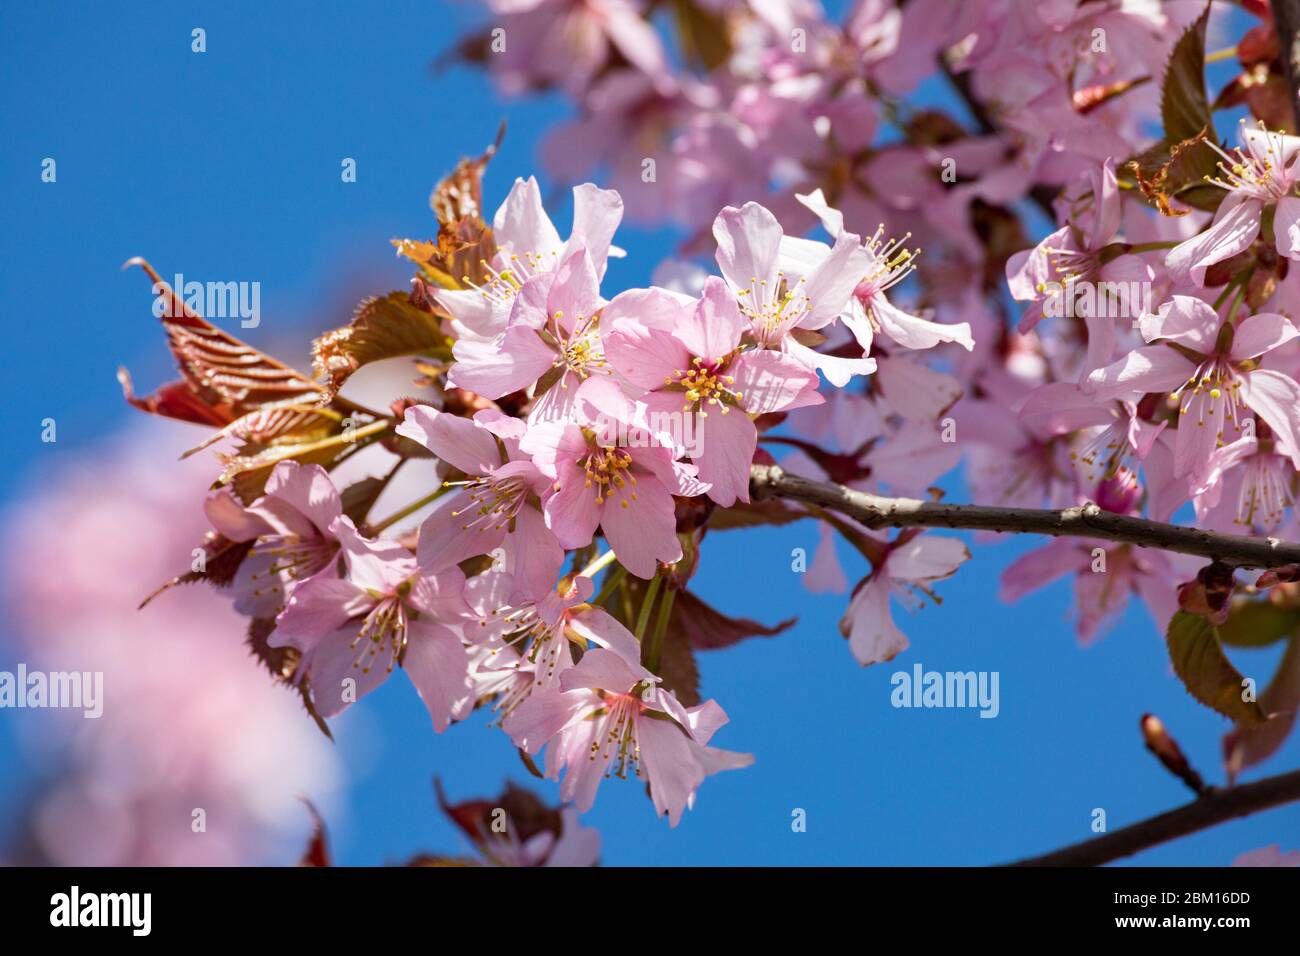 Pink cherry blossom close-up against clear blue sky Stock Photo